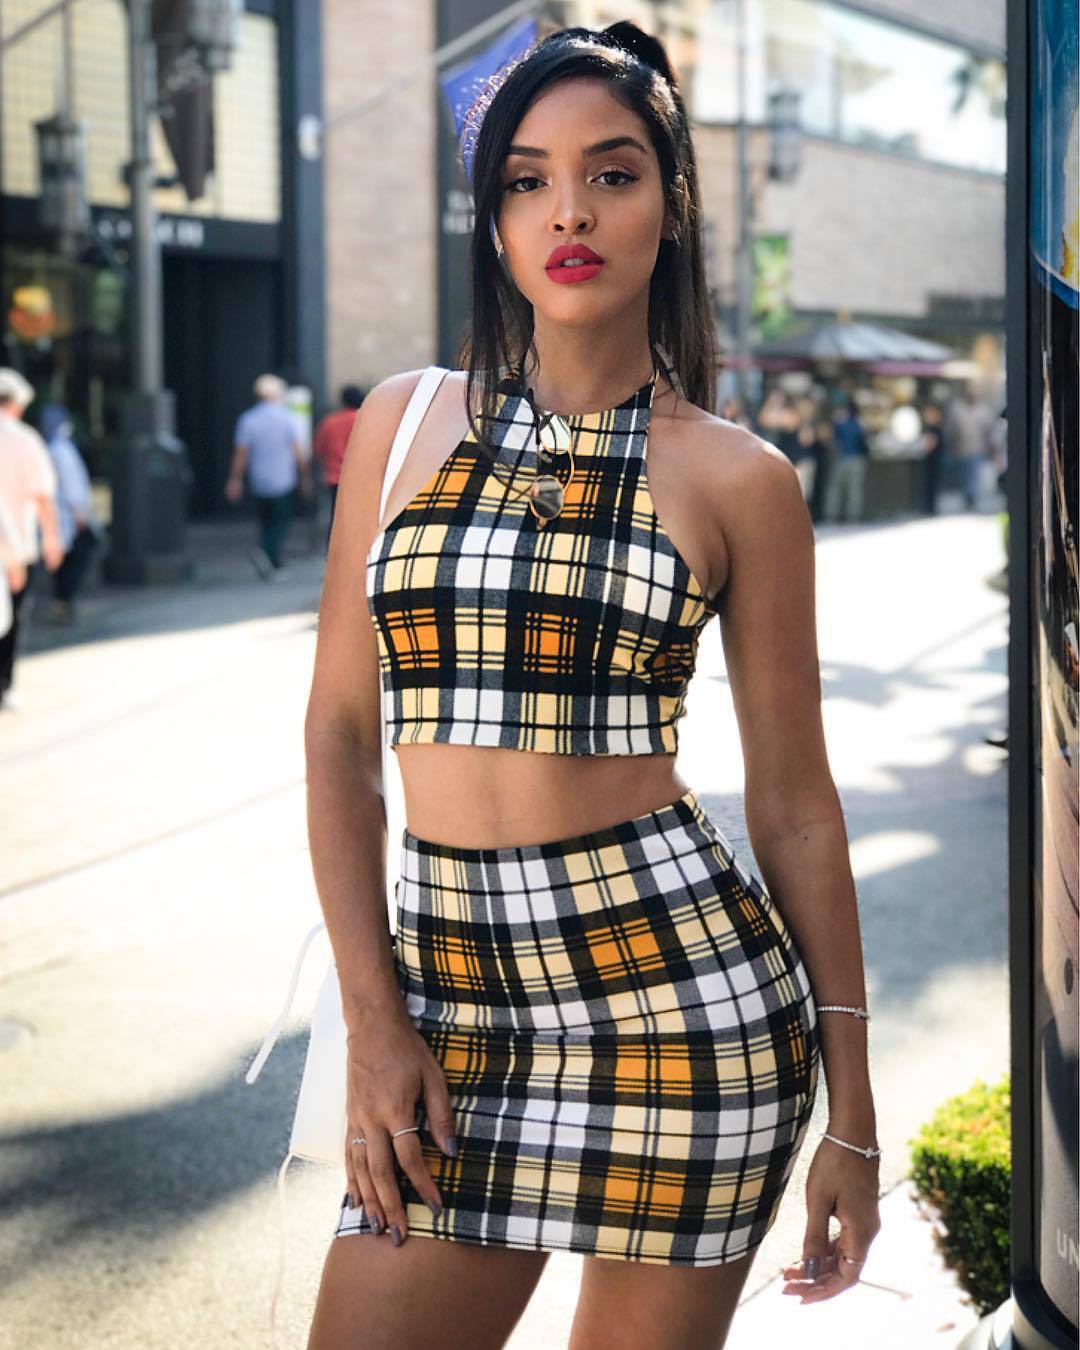 Classy Plaid Skirt with Plaid Crop Top Outfits: Crop top,  Check Skirt,  Mini Skirt Outfit  